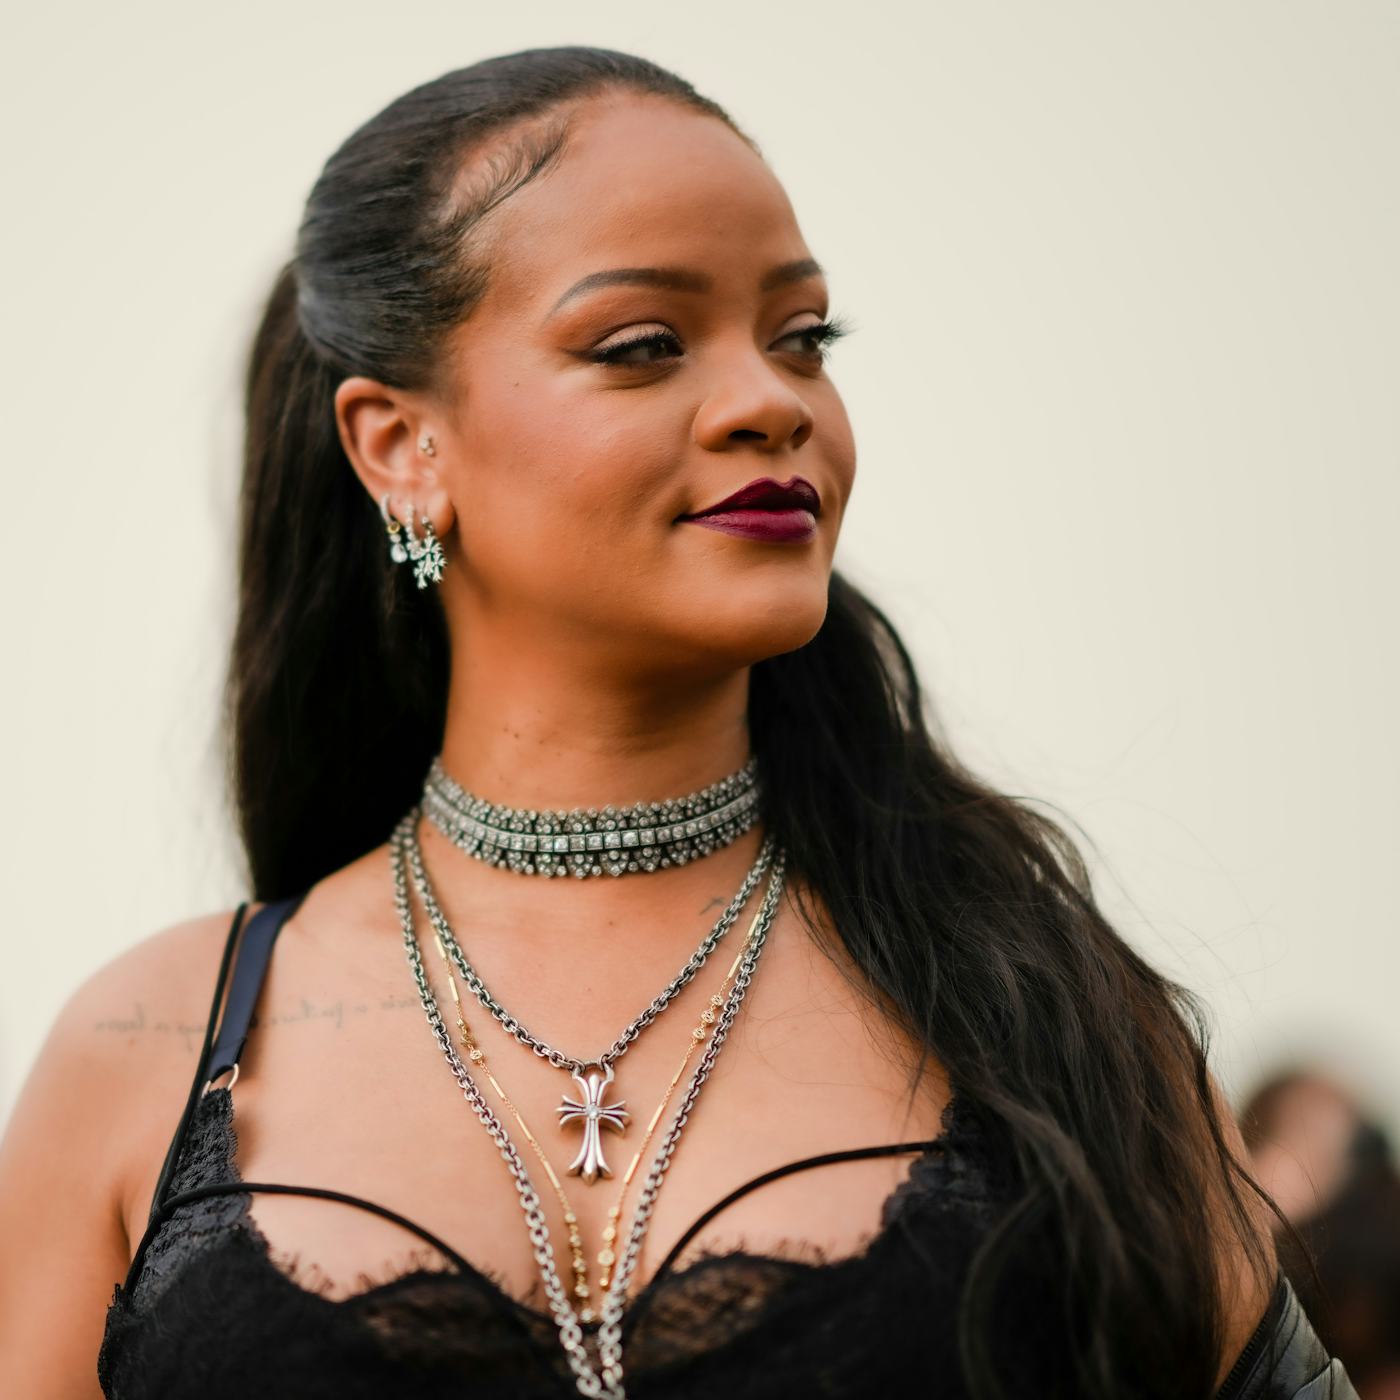 Rihanna's “Invisible” Shoes Will Match With Any Holiday Outfit